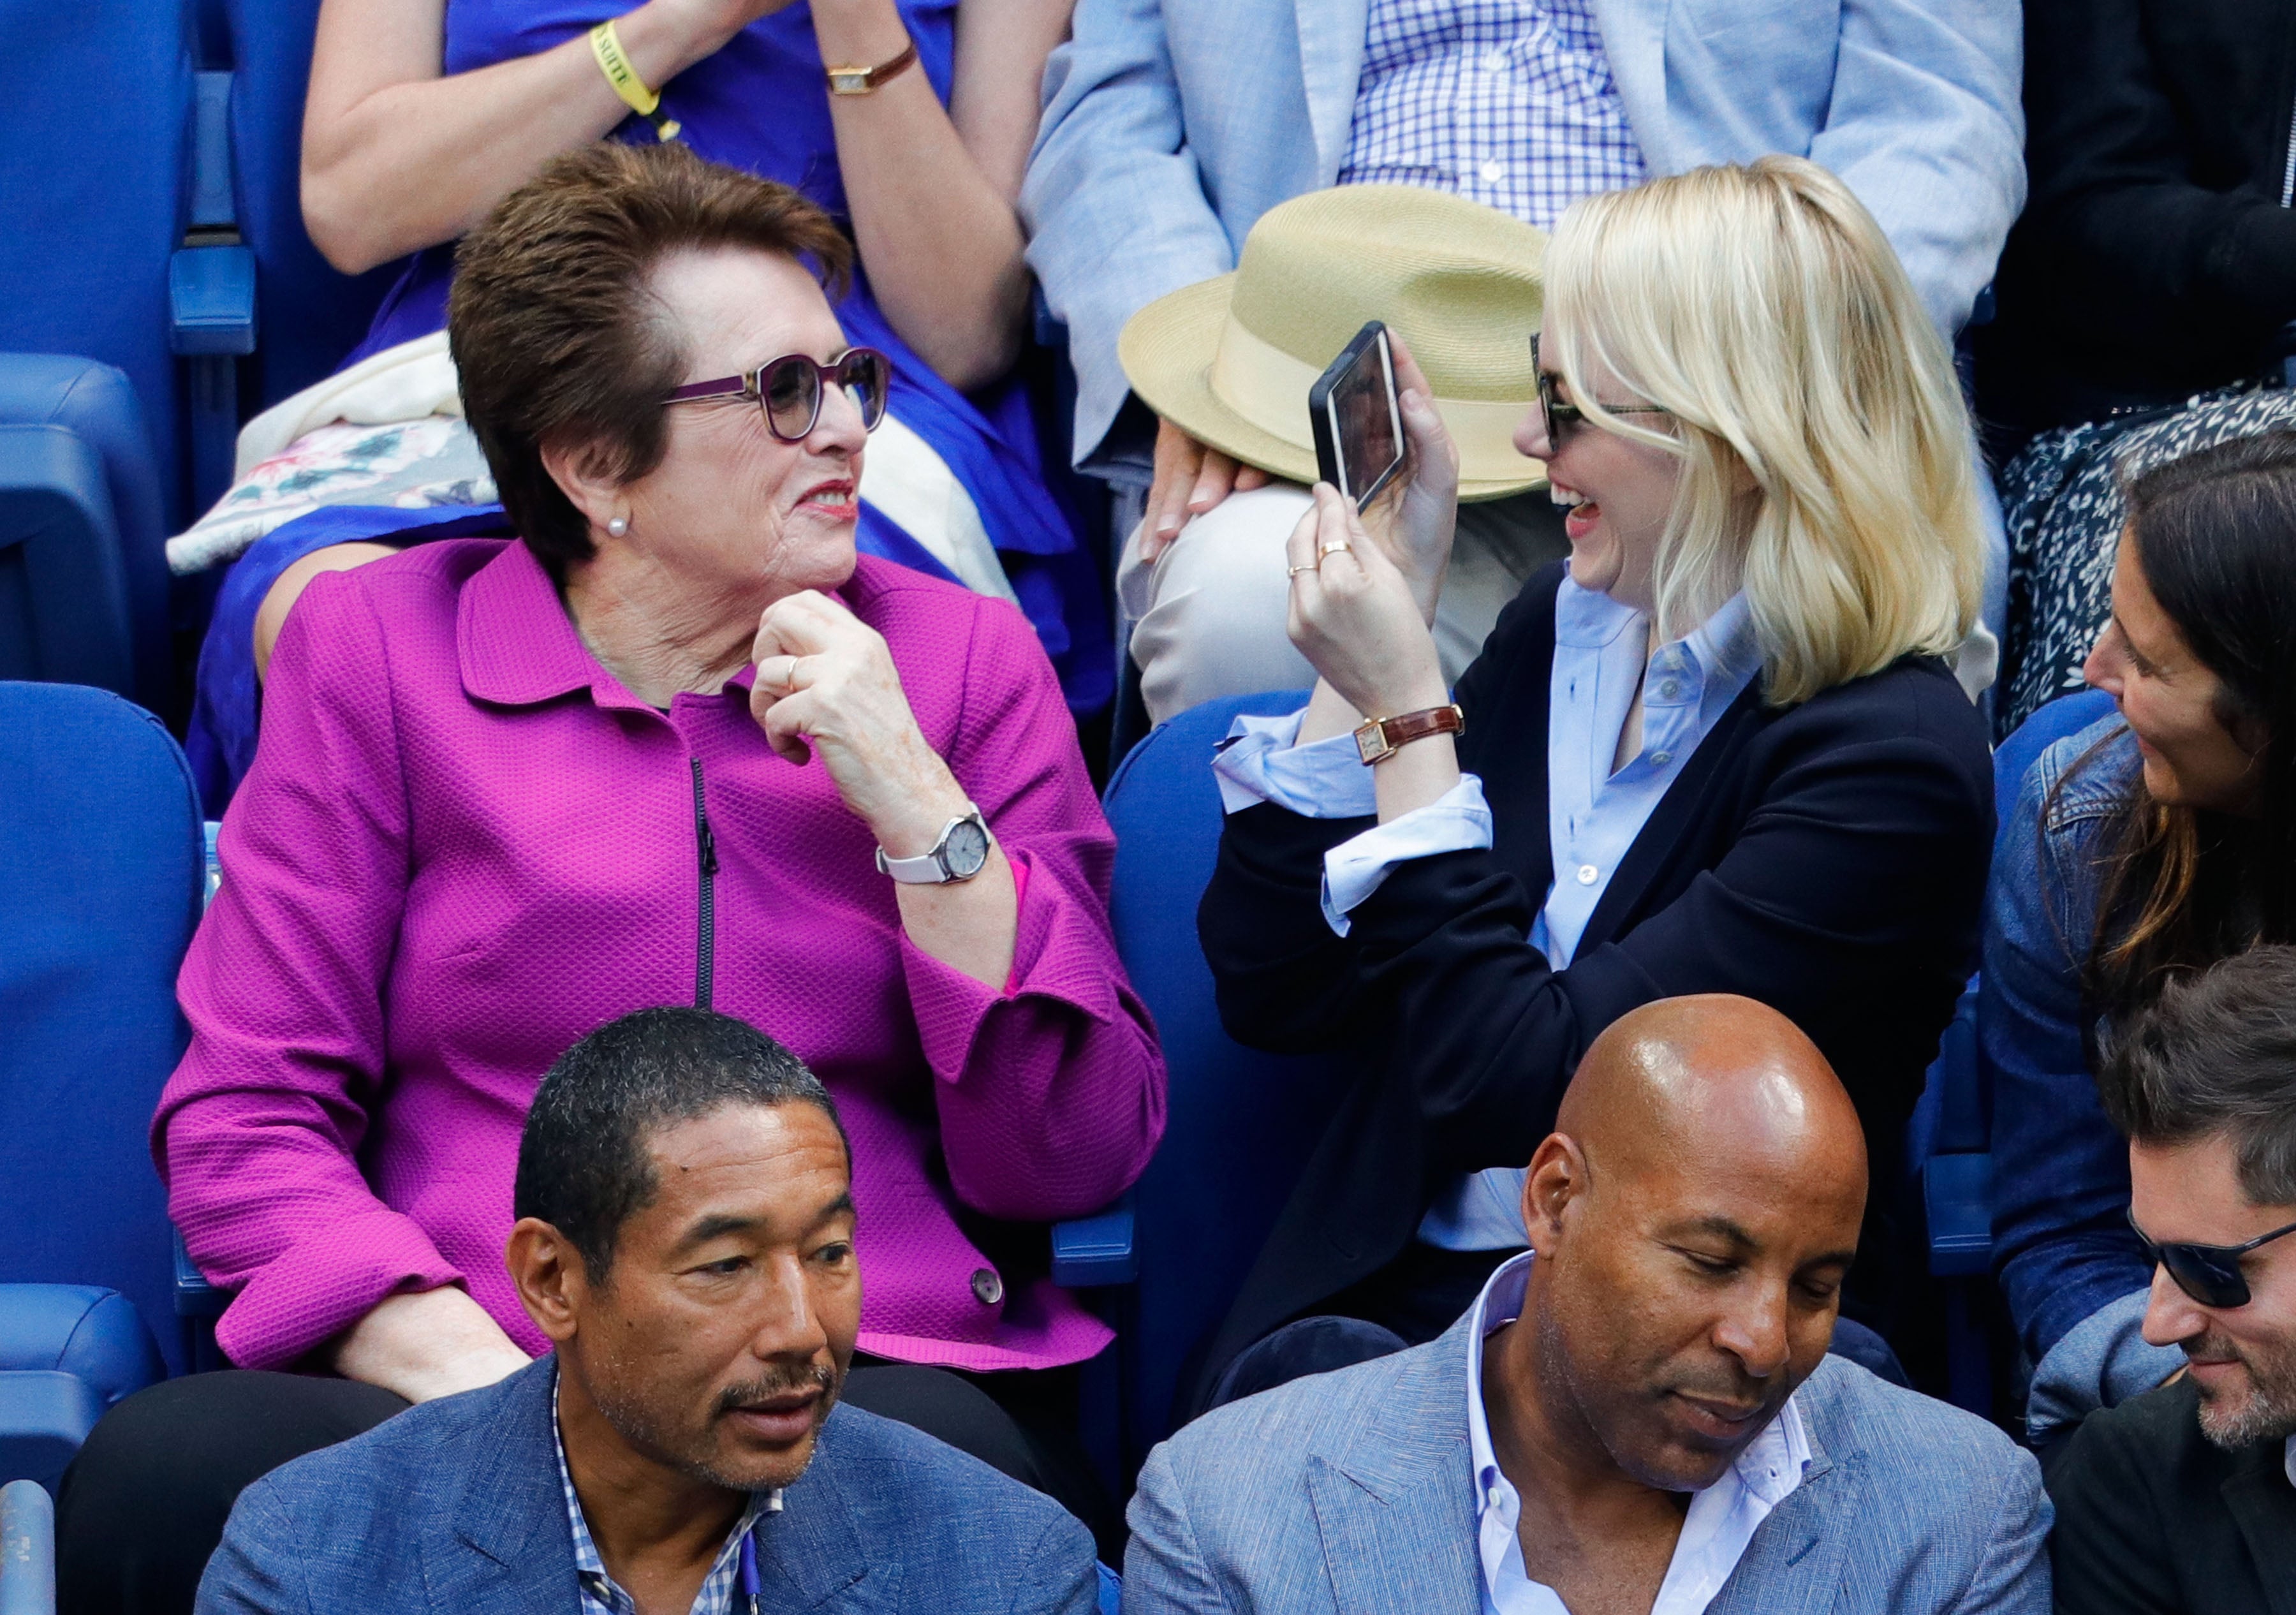 Battle of the Sexes: Emma Stone and Billie Jean King attend US Open together